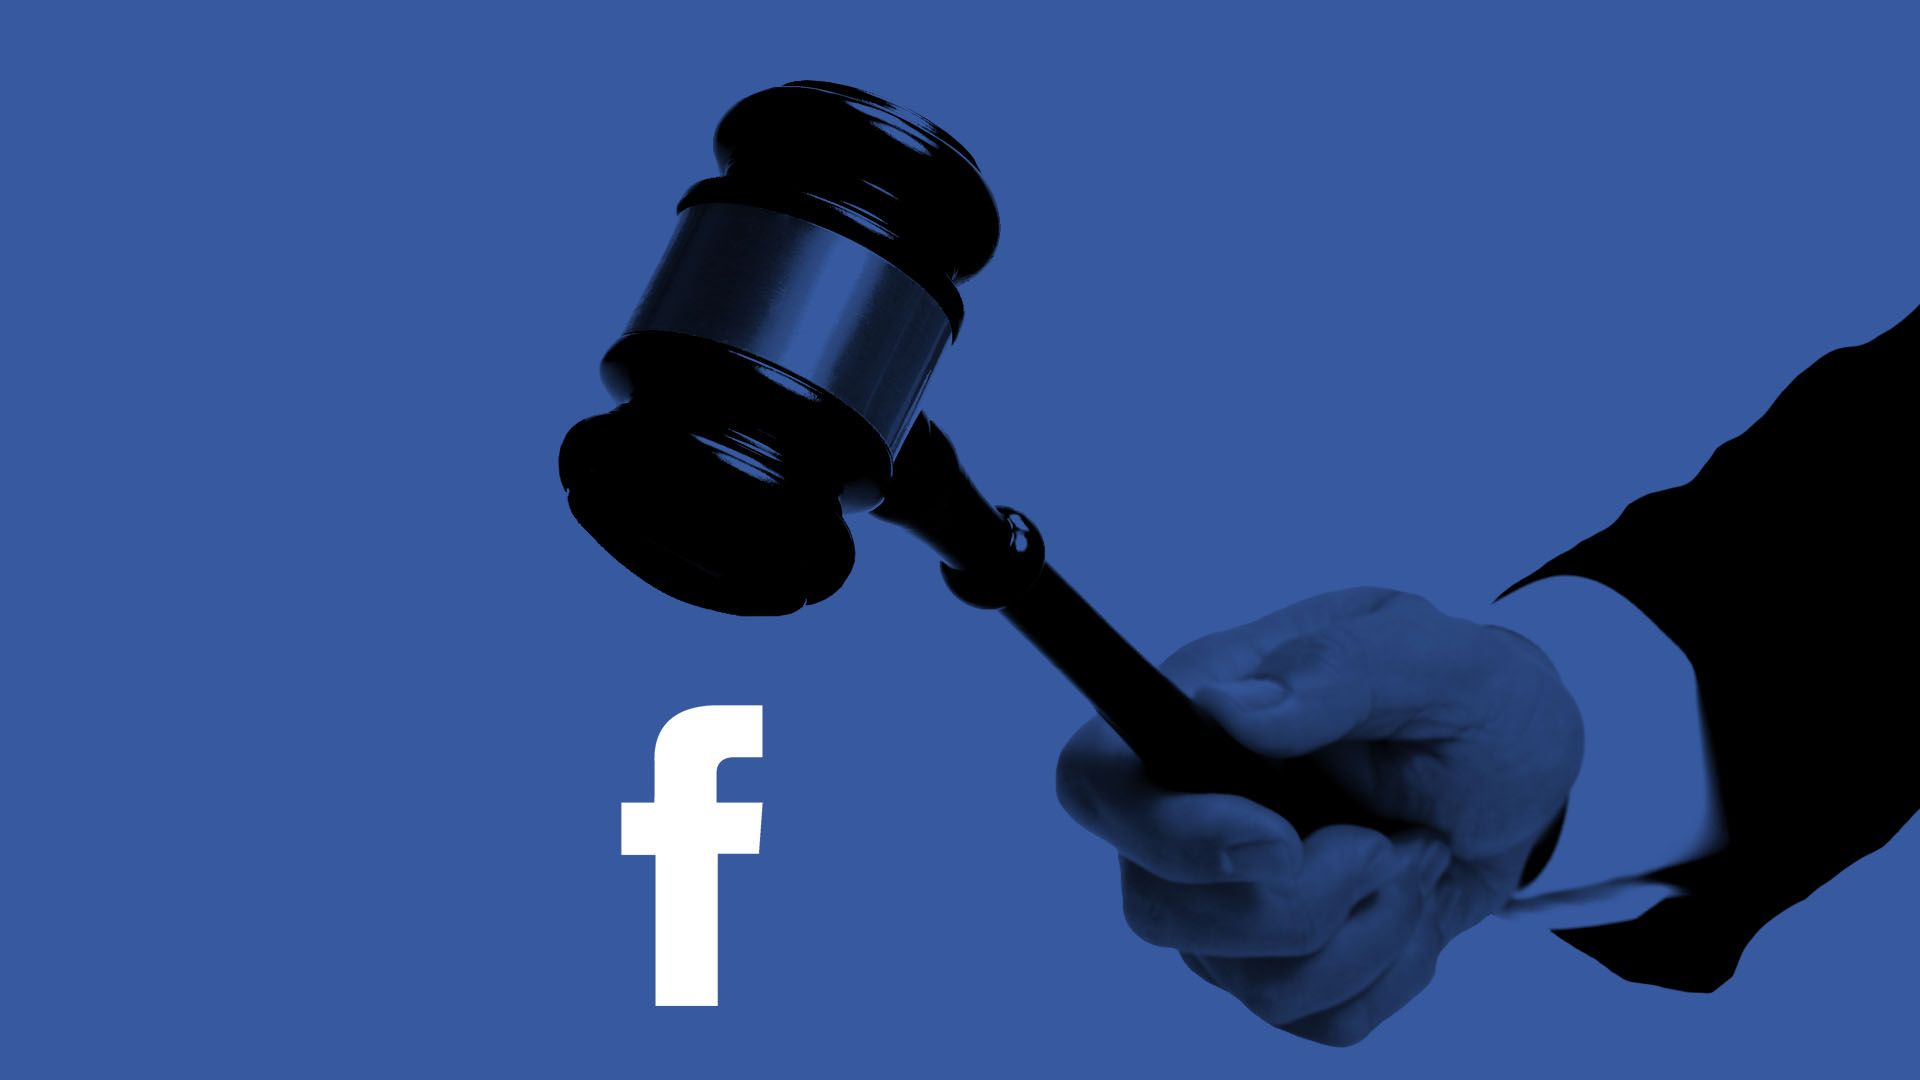 In this illustration, the Facebook logo is being hit with a gavel